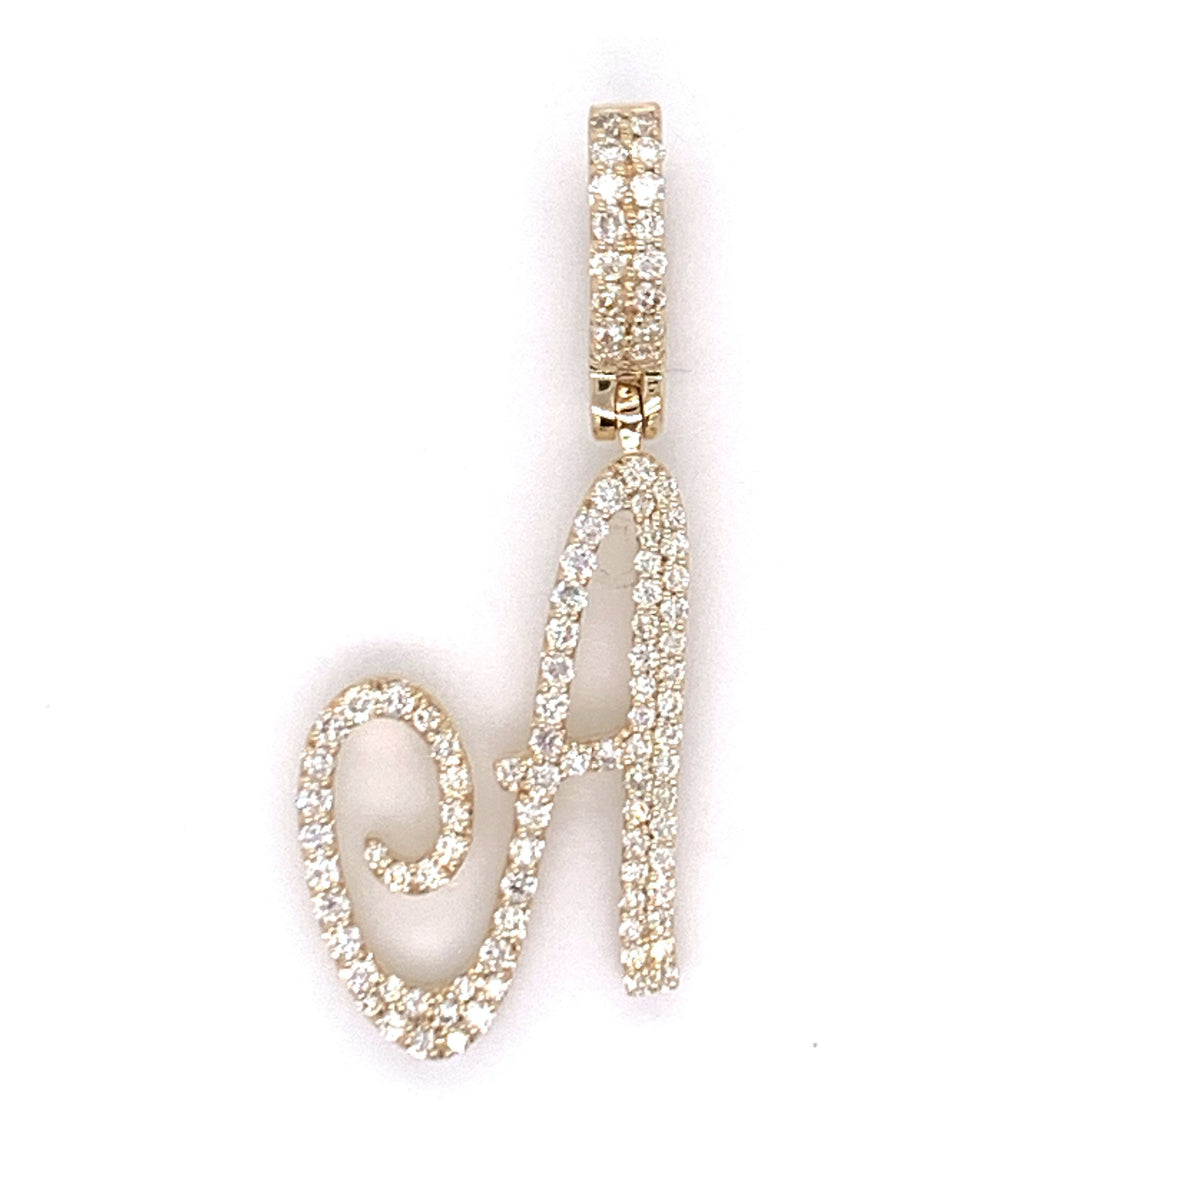 1.00 CT. Diamond Initial "A" Pendant in Gold With Chain - White Carat Diamonds 